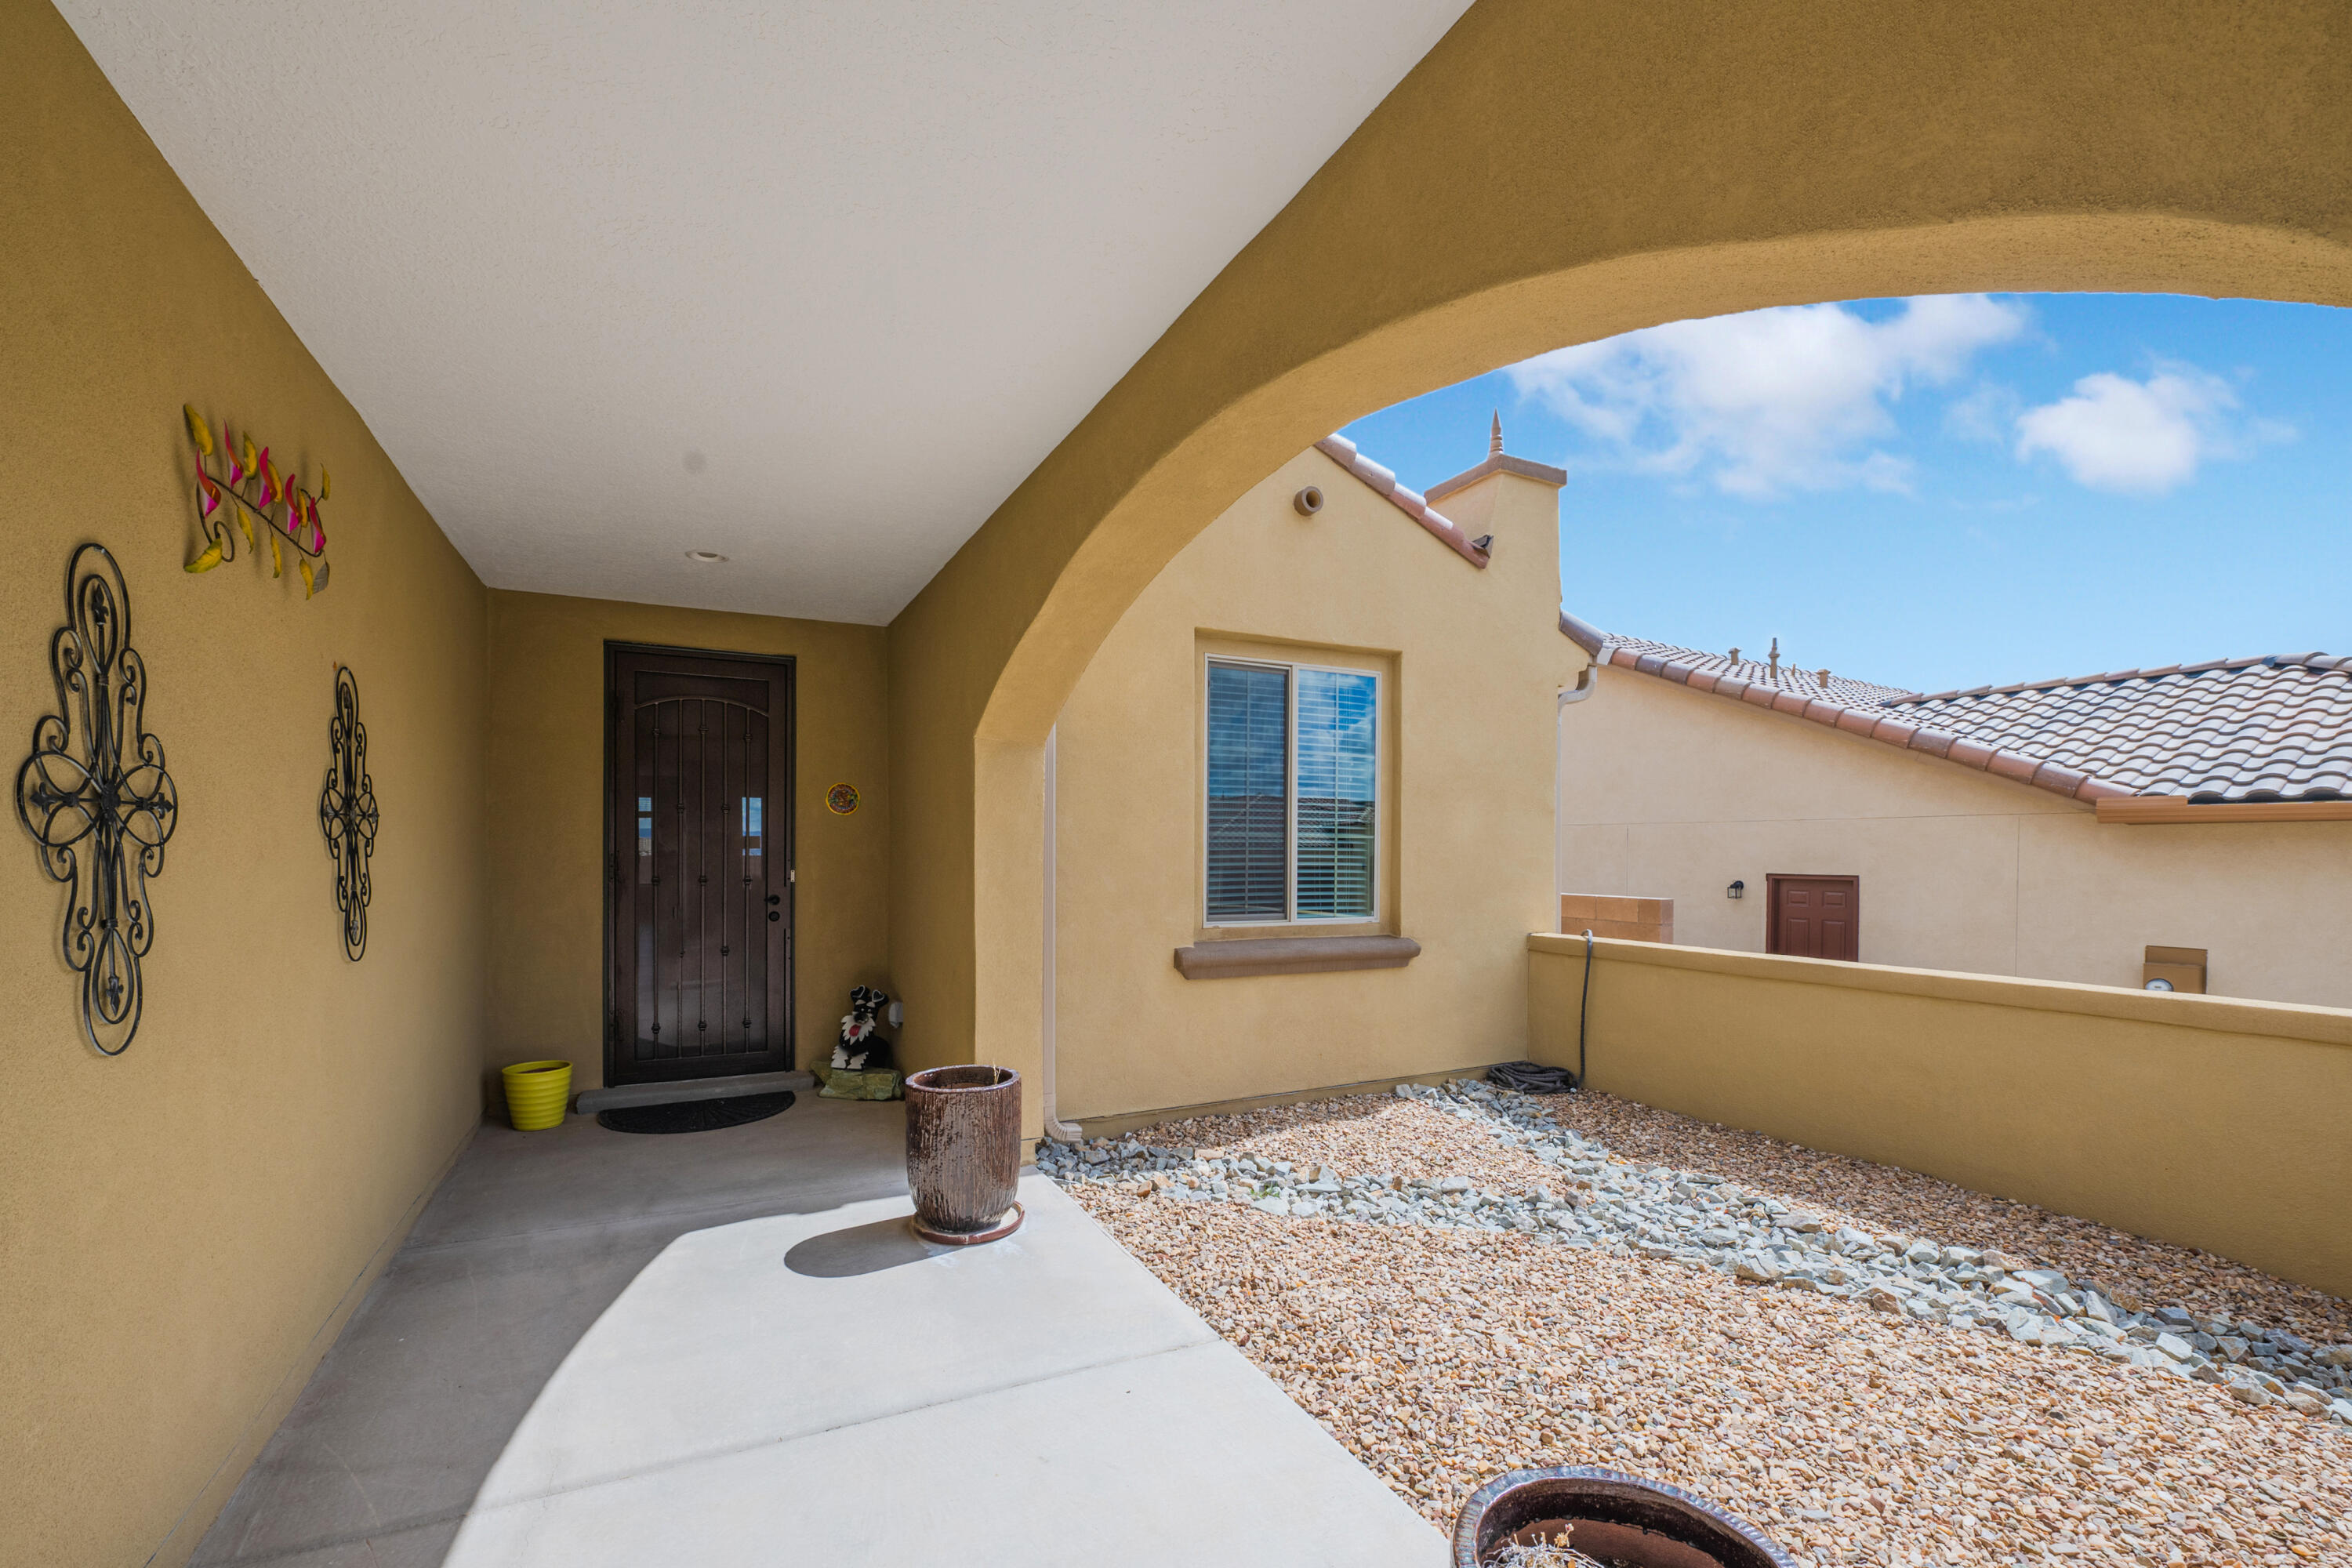 2304 Komatke Trail NW, Albuquerque, New Mexico 87120, 2 Bedrooms Bedrooms, ,2 BathroomsBathrooms,Residential,For Sale,2304 Komatke Trail NW,1059469